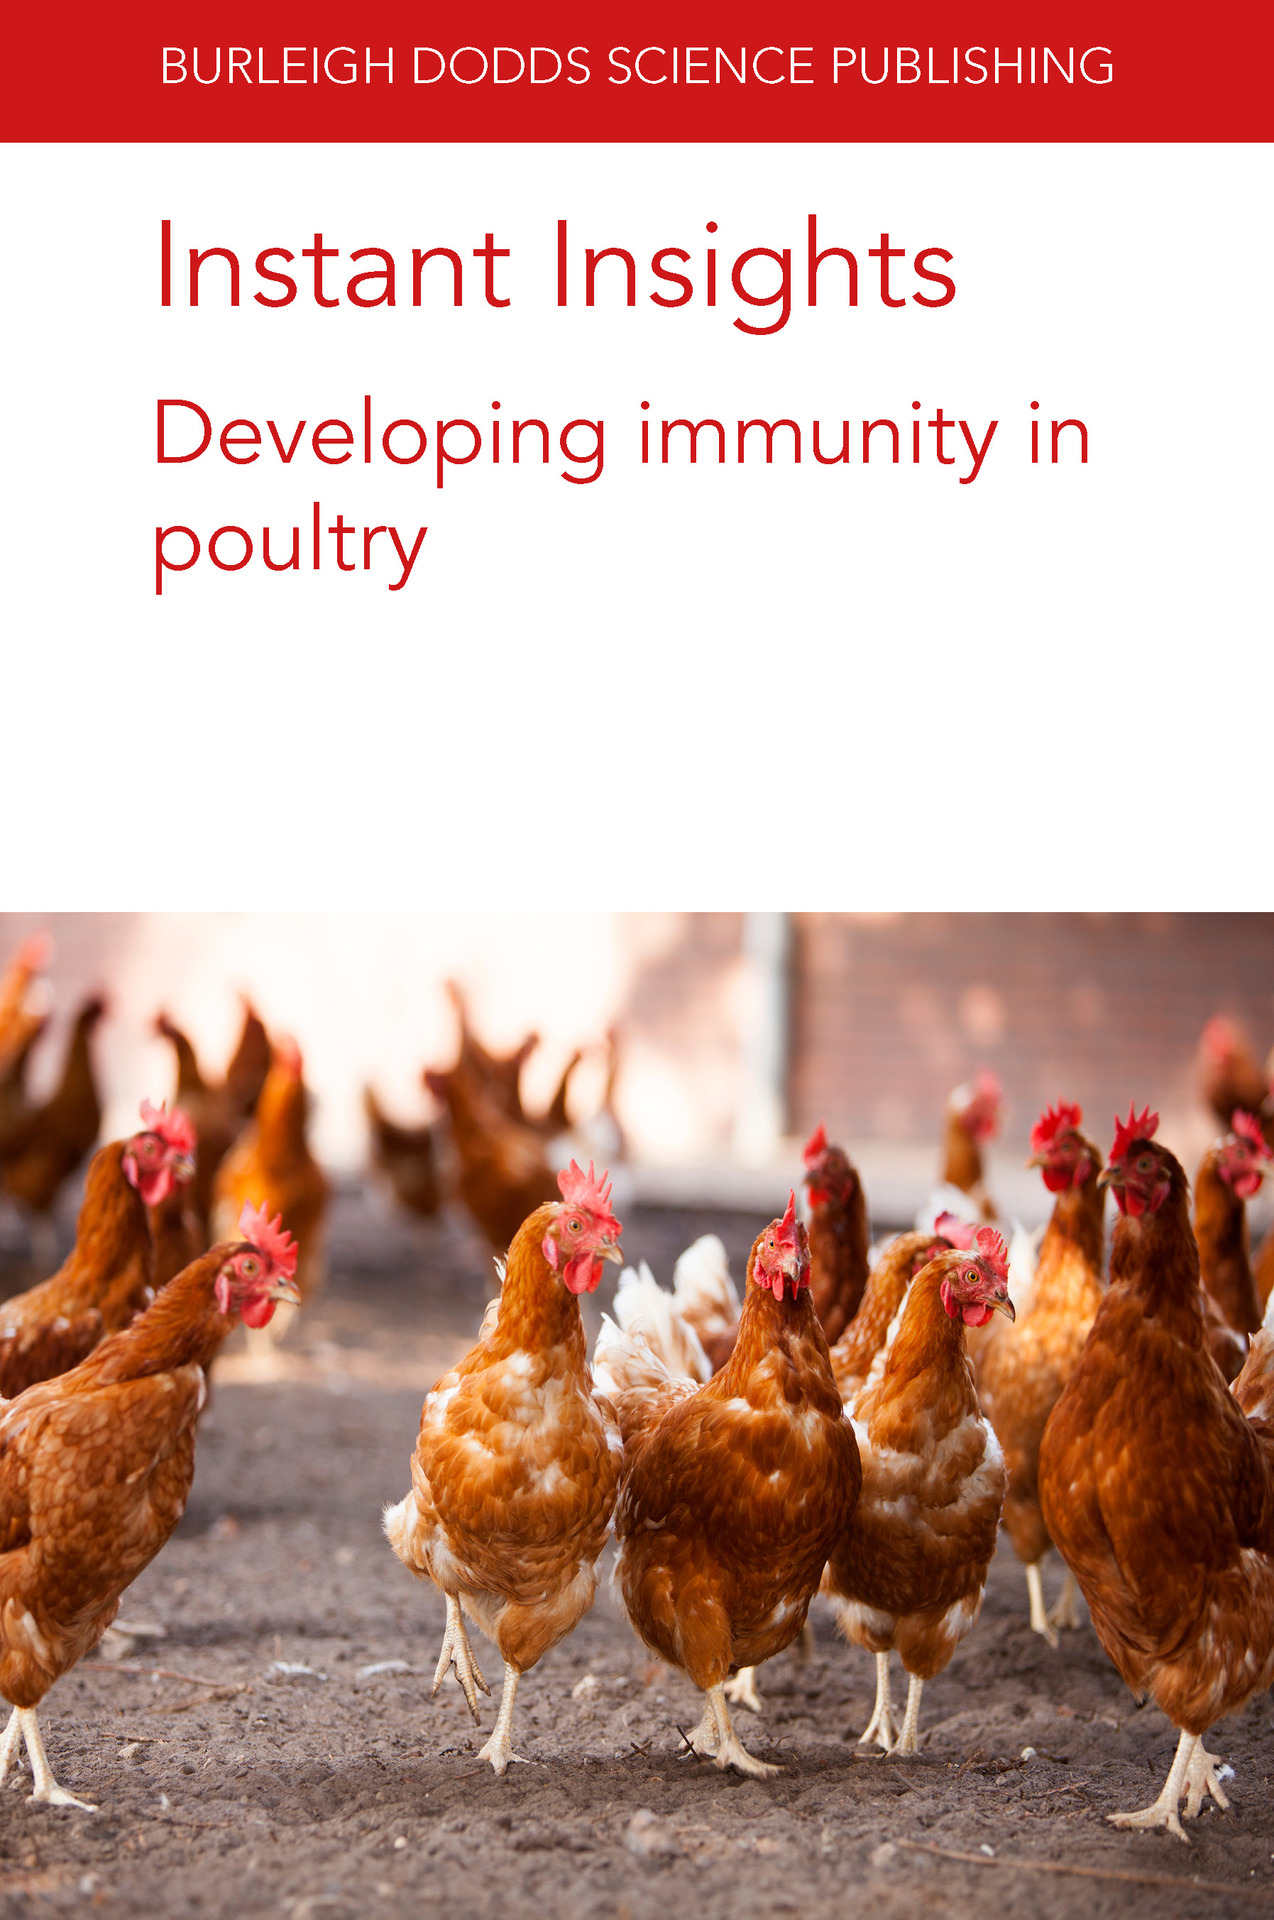 Developing immunity in poultry